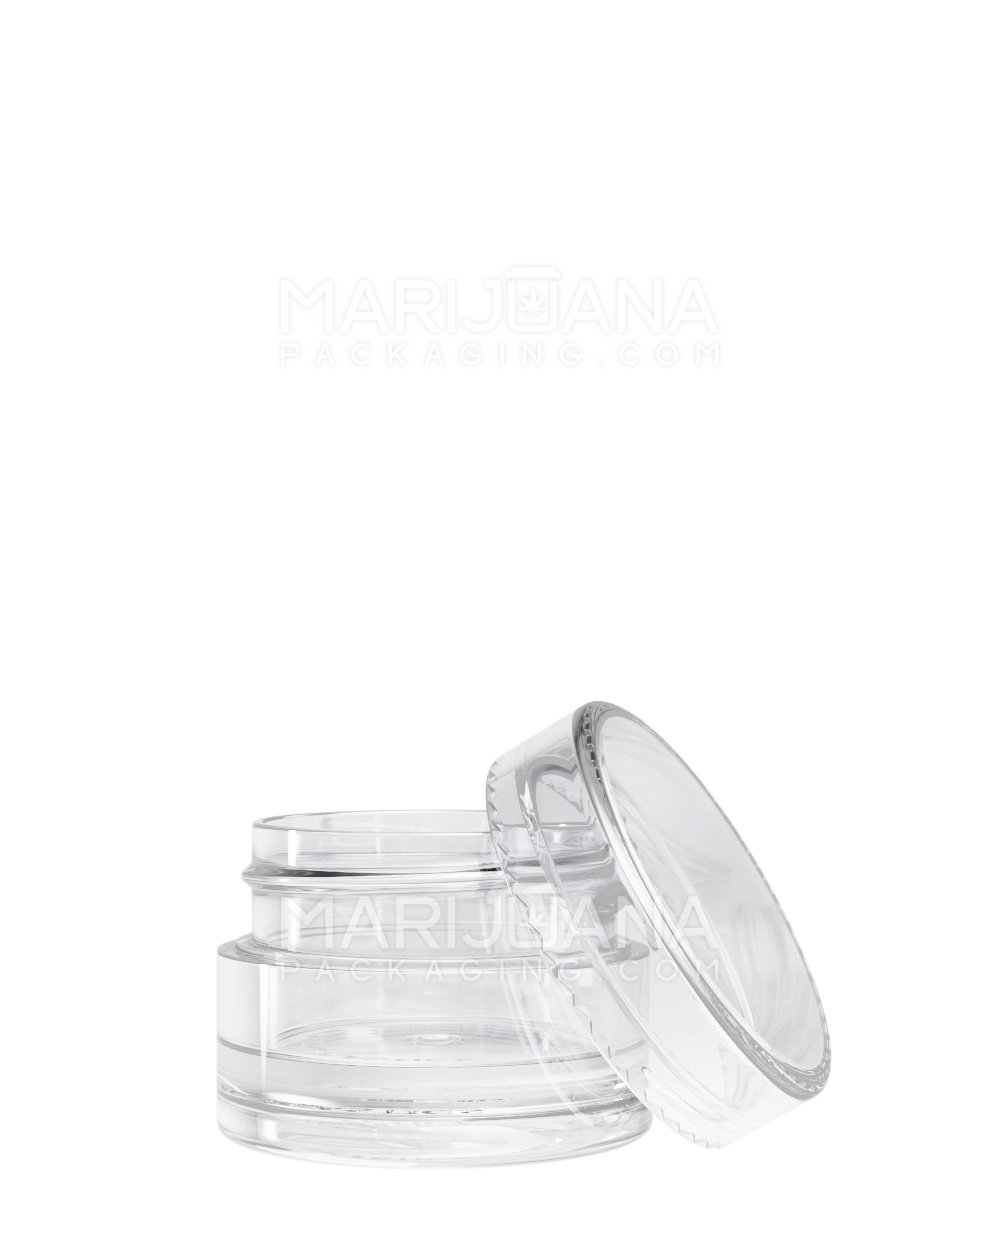 Clear Thick Wall Container w/ Screw Top Cap | 3.7mL - Plastic - 1300 Count - 1